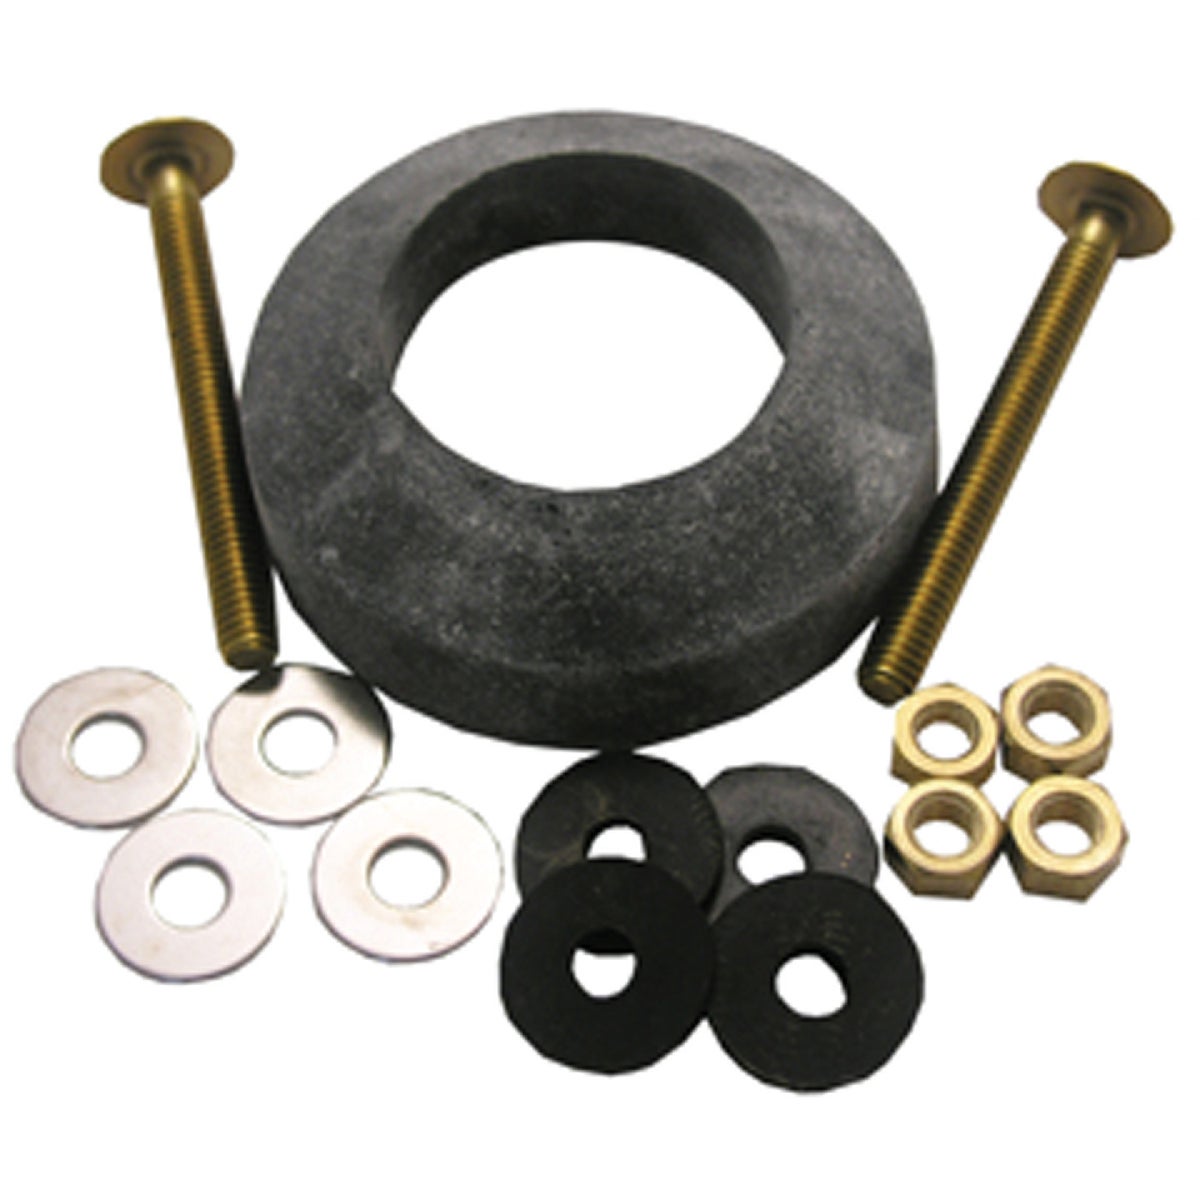 Lasco Toilet Tank To Bowl Bolt Kit with Recessed Gasket 